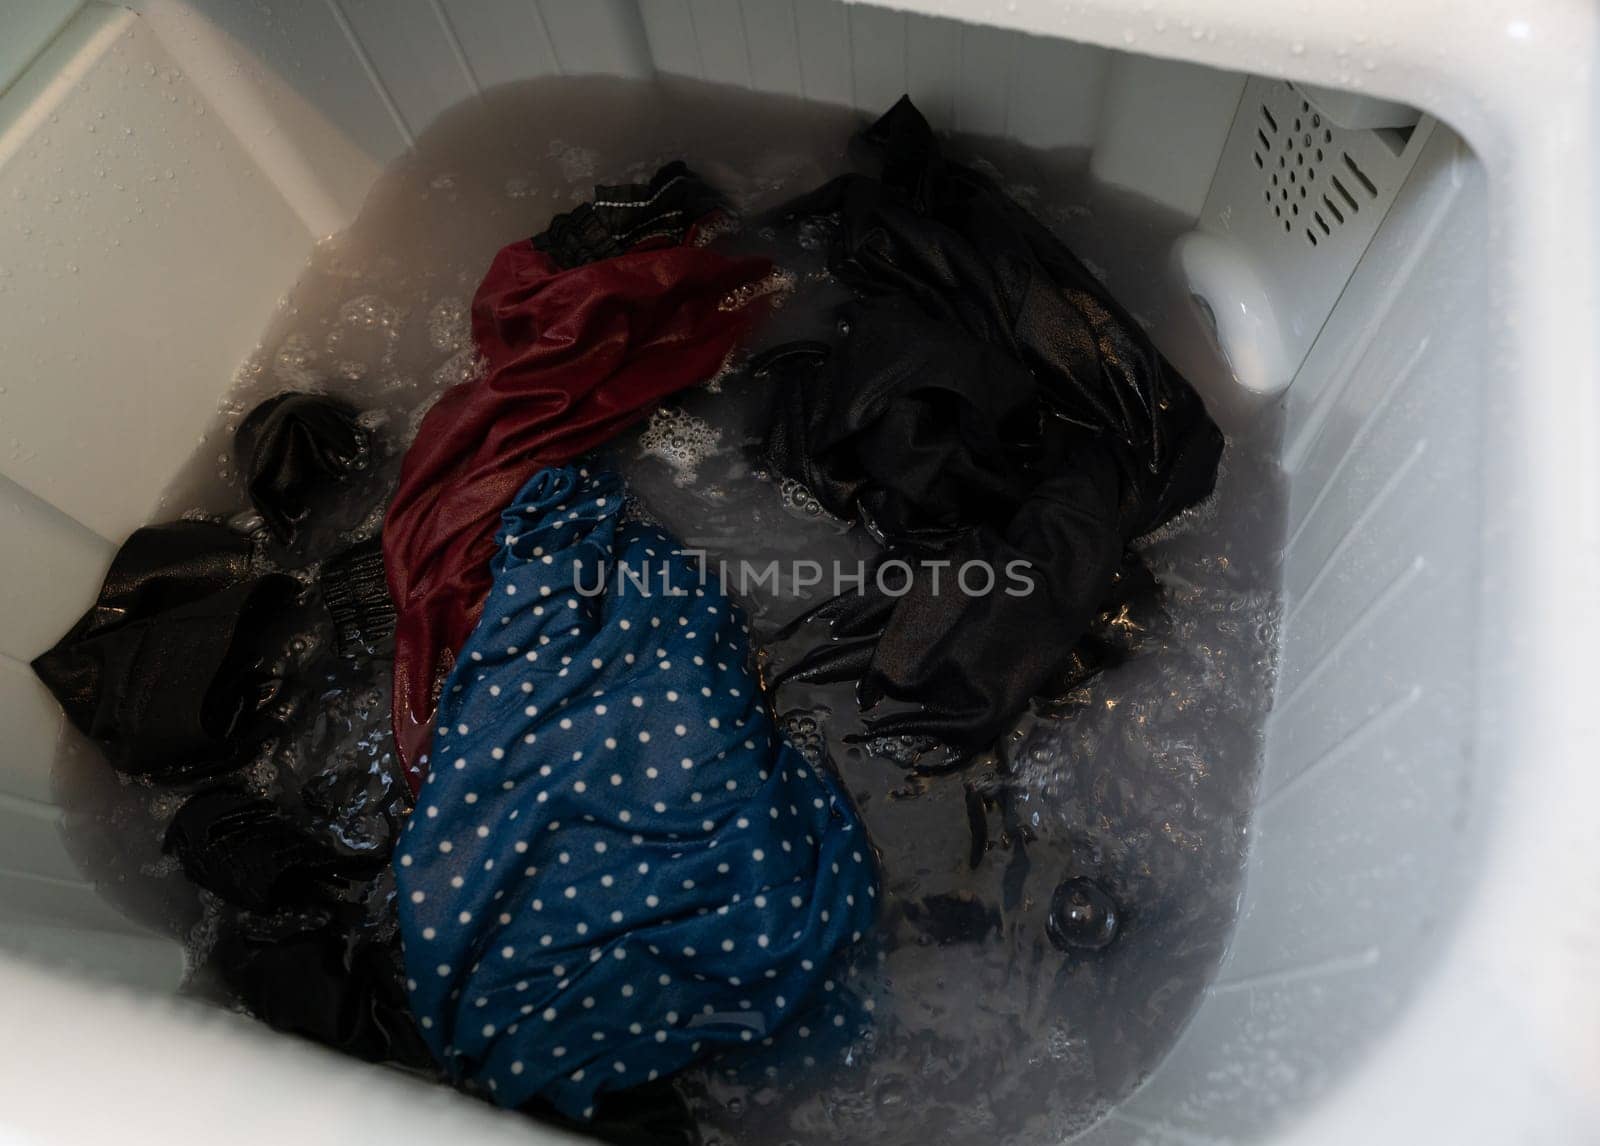 Dirty clothes in top loading washing machine. Clothes with bubble of laundry detergent in washing machine. Laundry concept. Top load washer. Housework. Washing machine and dirty water from cleaning. by Fahroni